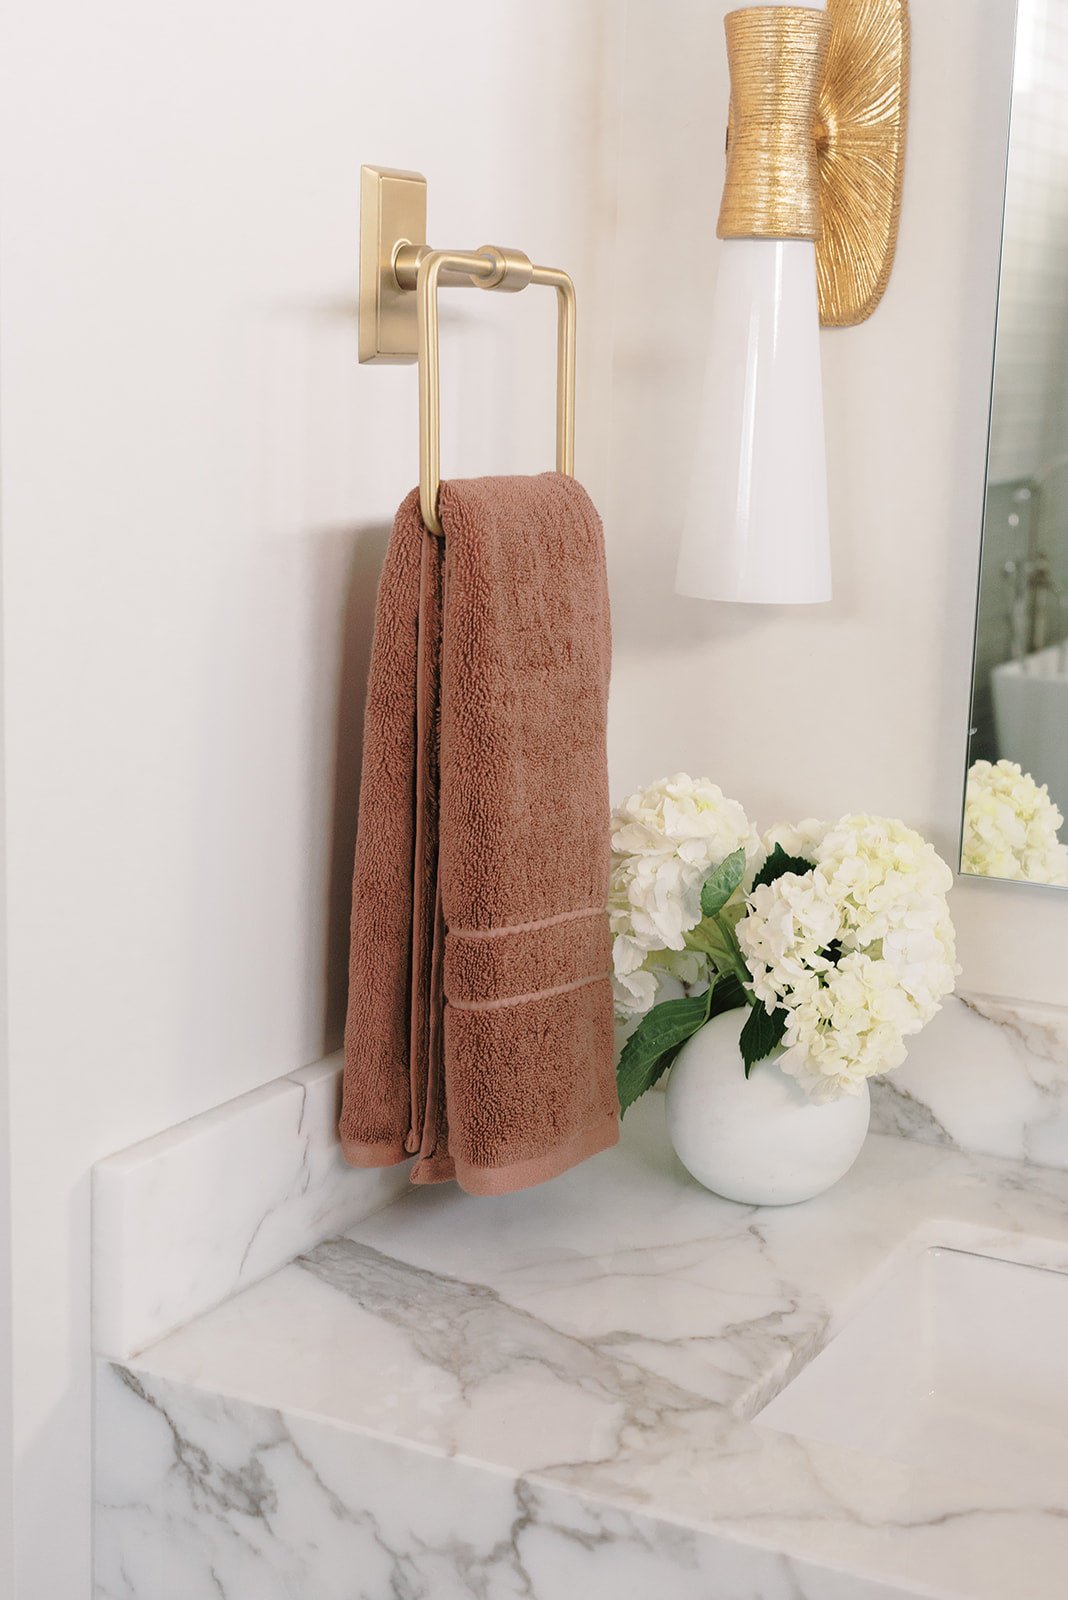 Premium Plush Hand Towel in the color Clay. Photo of Clay Premium Plush Hand Towel taken in a bathroom hanging from a gold hand towel ring 